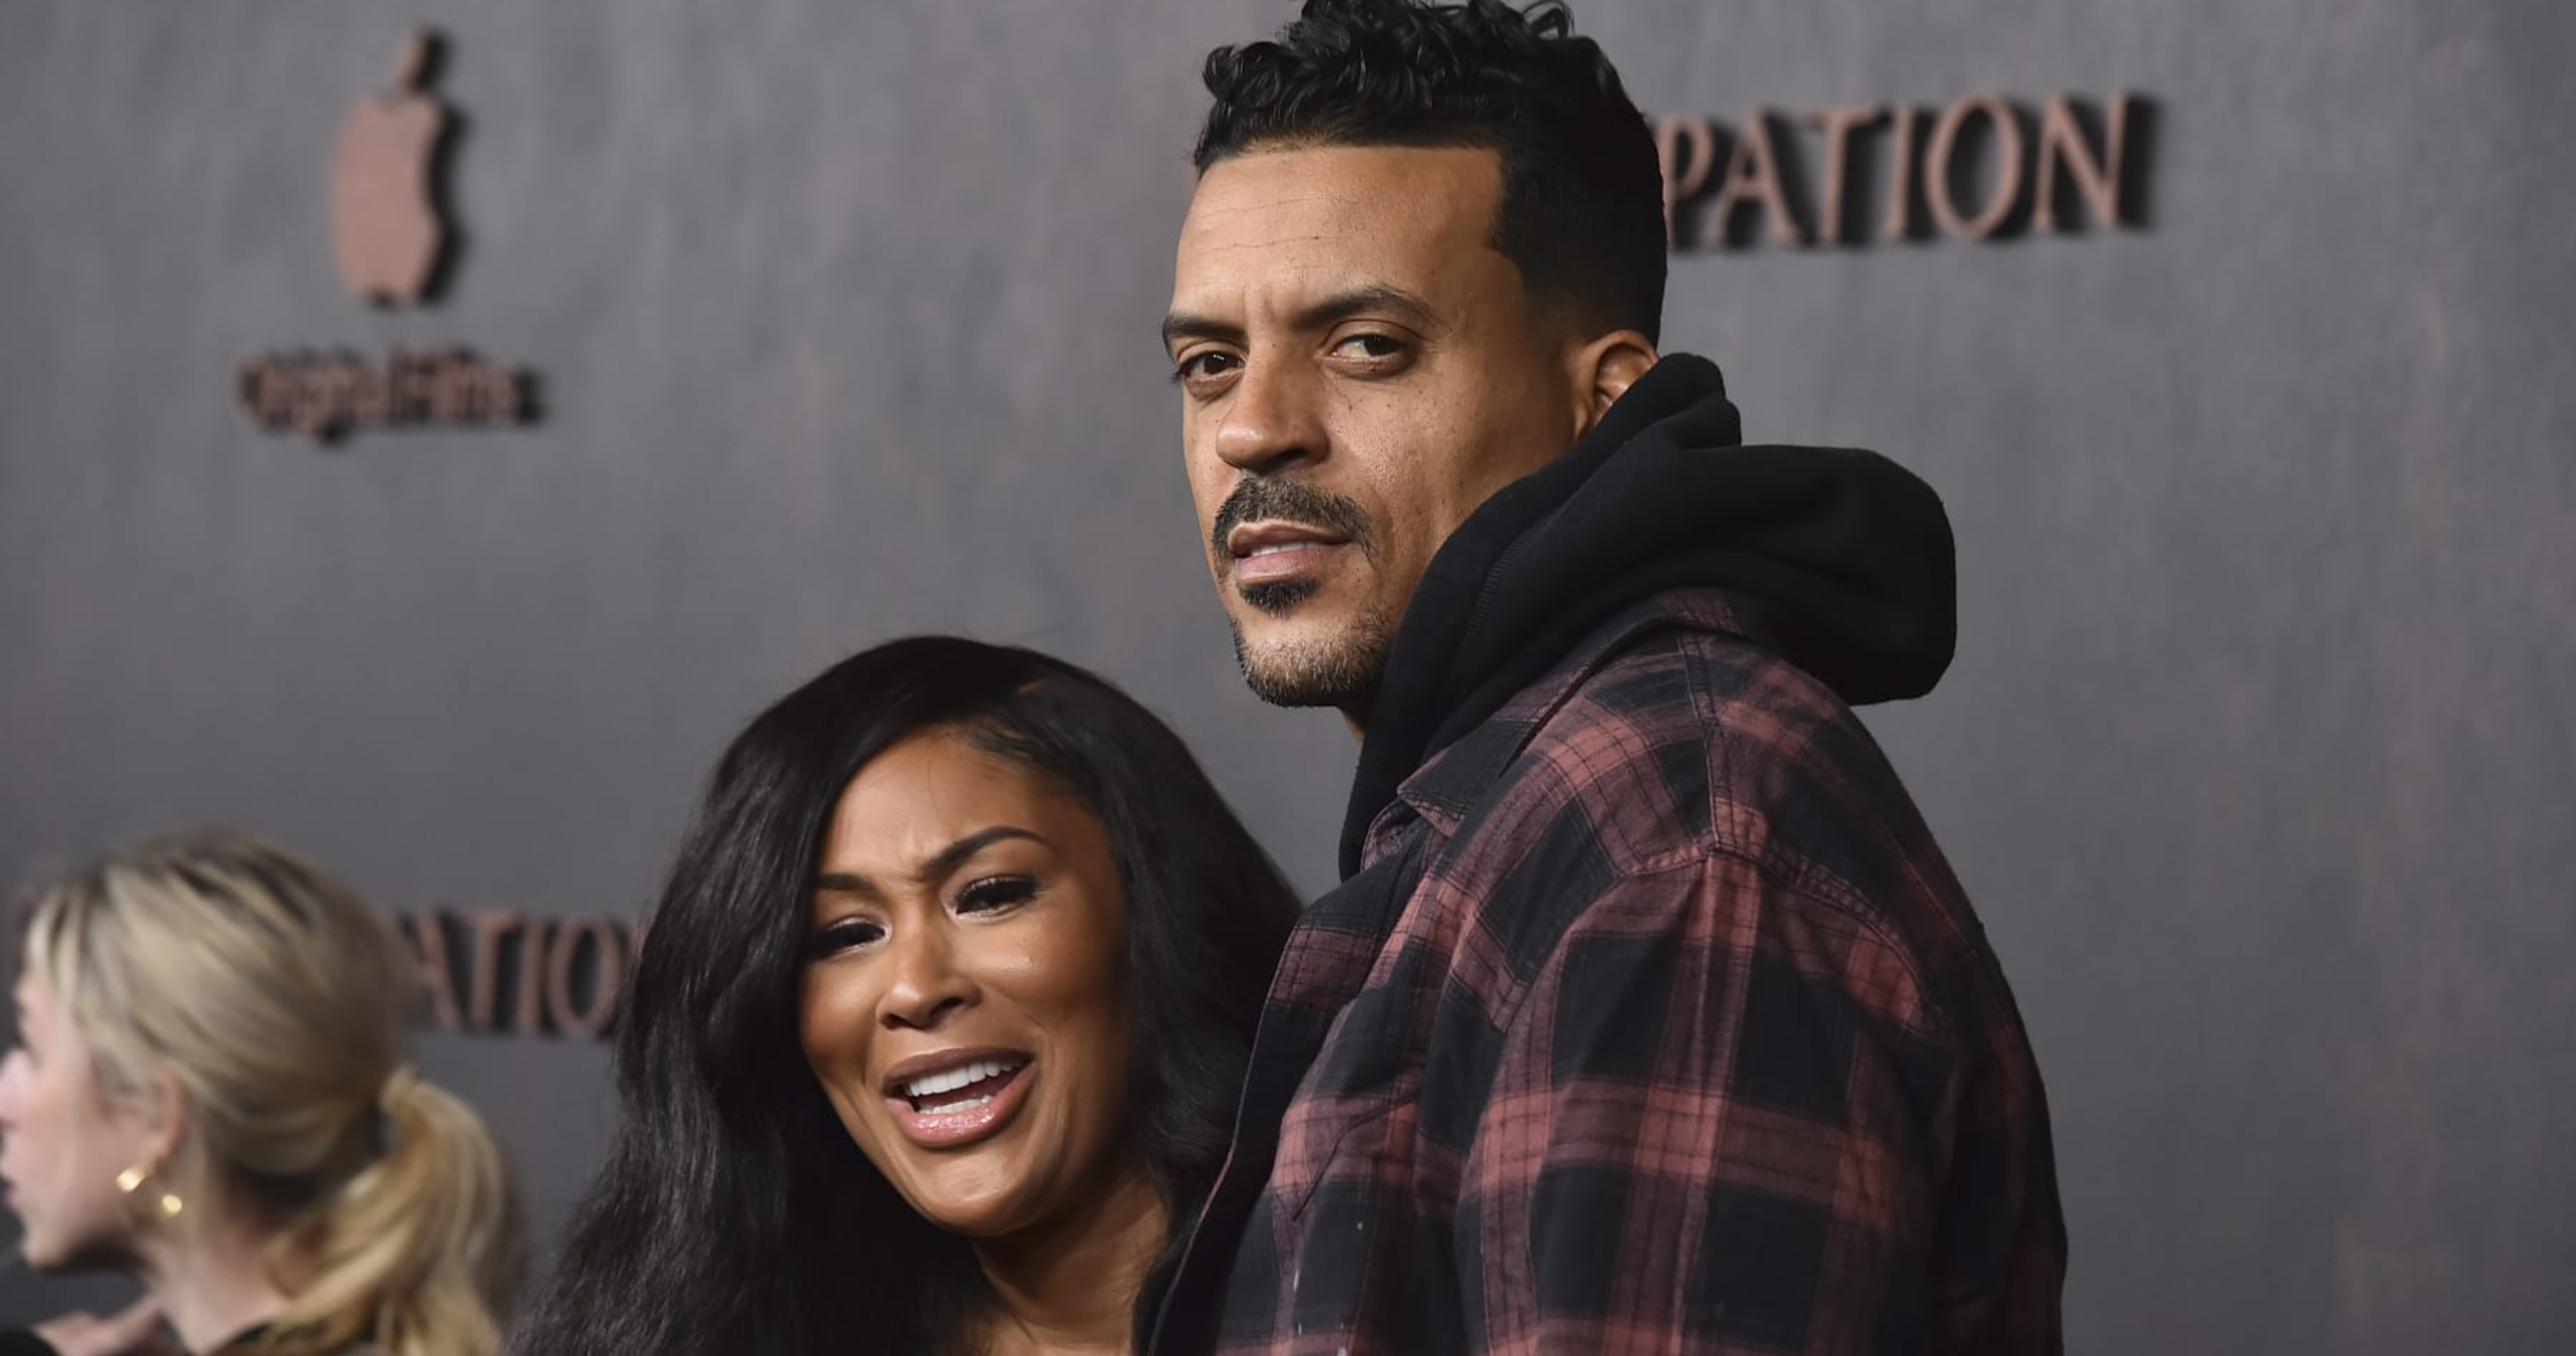 Matt Barnes EXP0SED By Girlfriend's Ex HARASSING His Fiancé After He's  OUTED Mistreating STEP-KlDS 